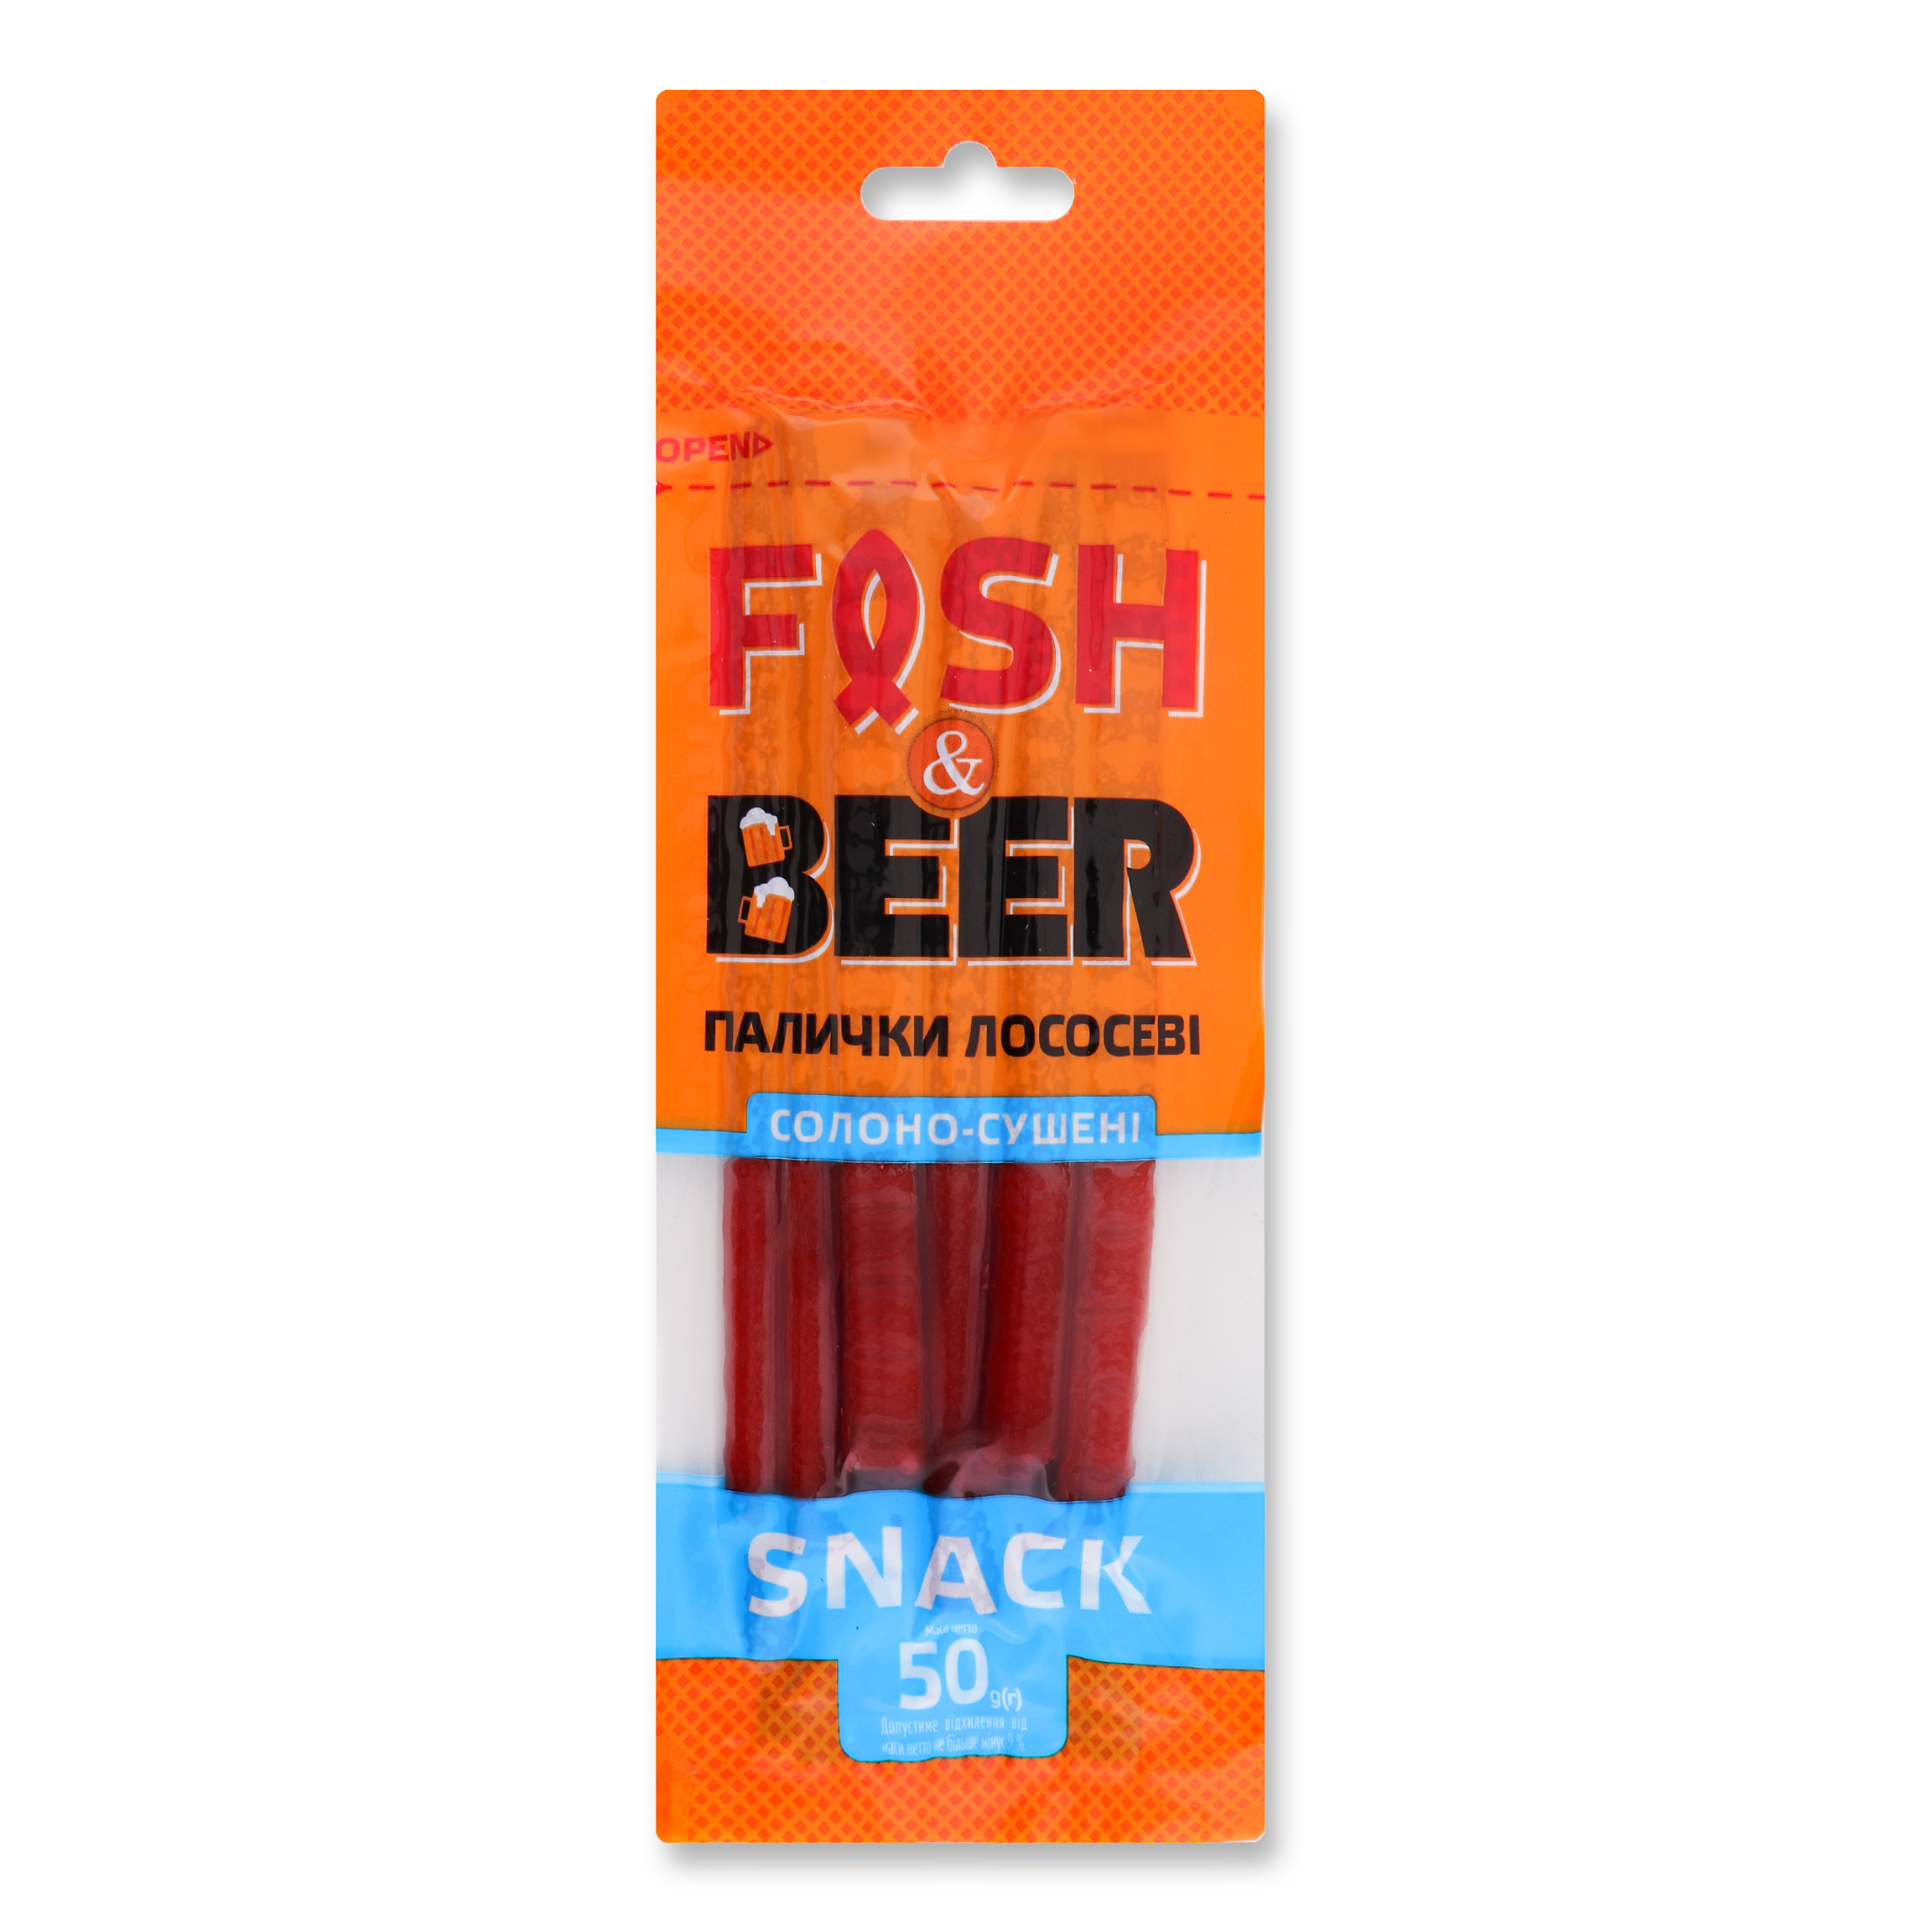 Fish & Beer Salted Dried Salmon Sticks 50g